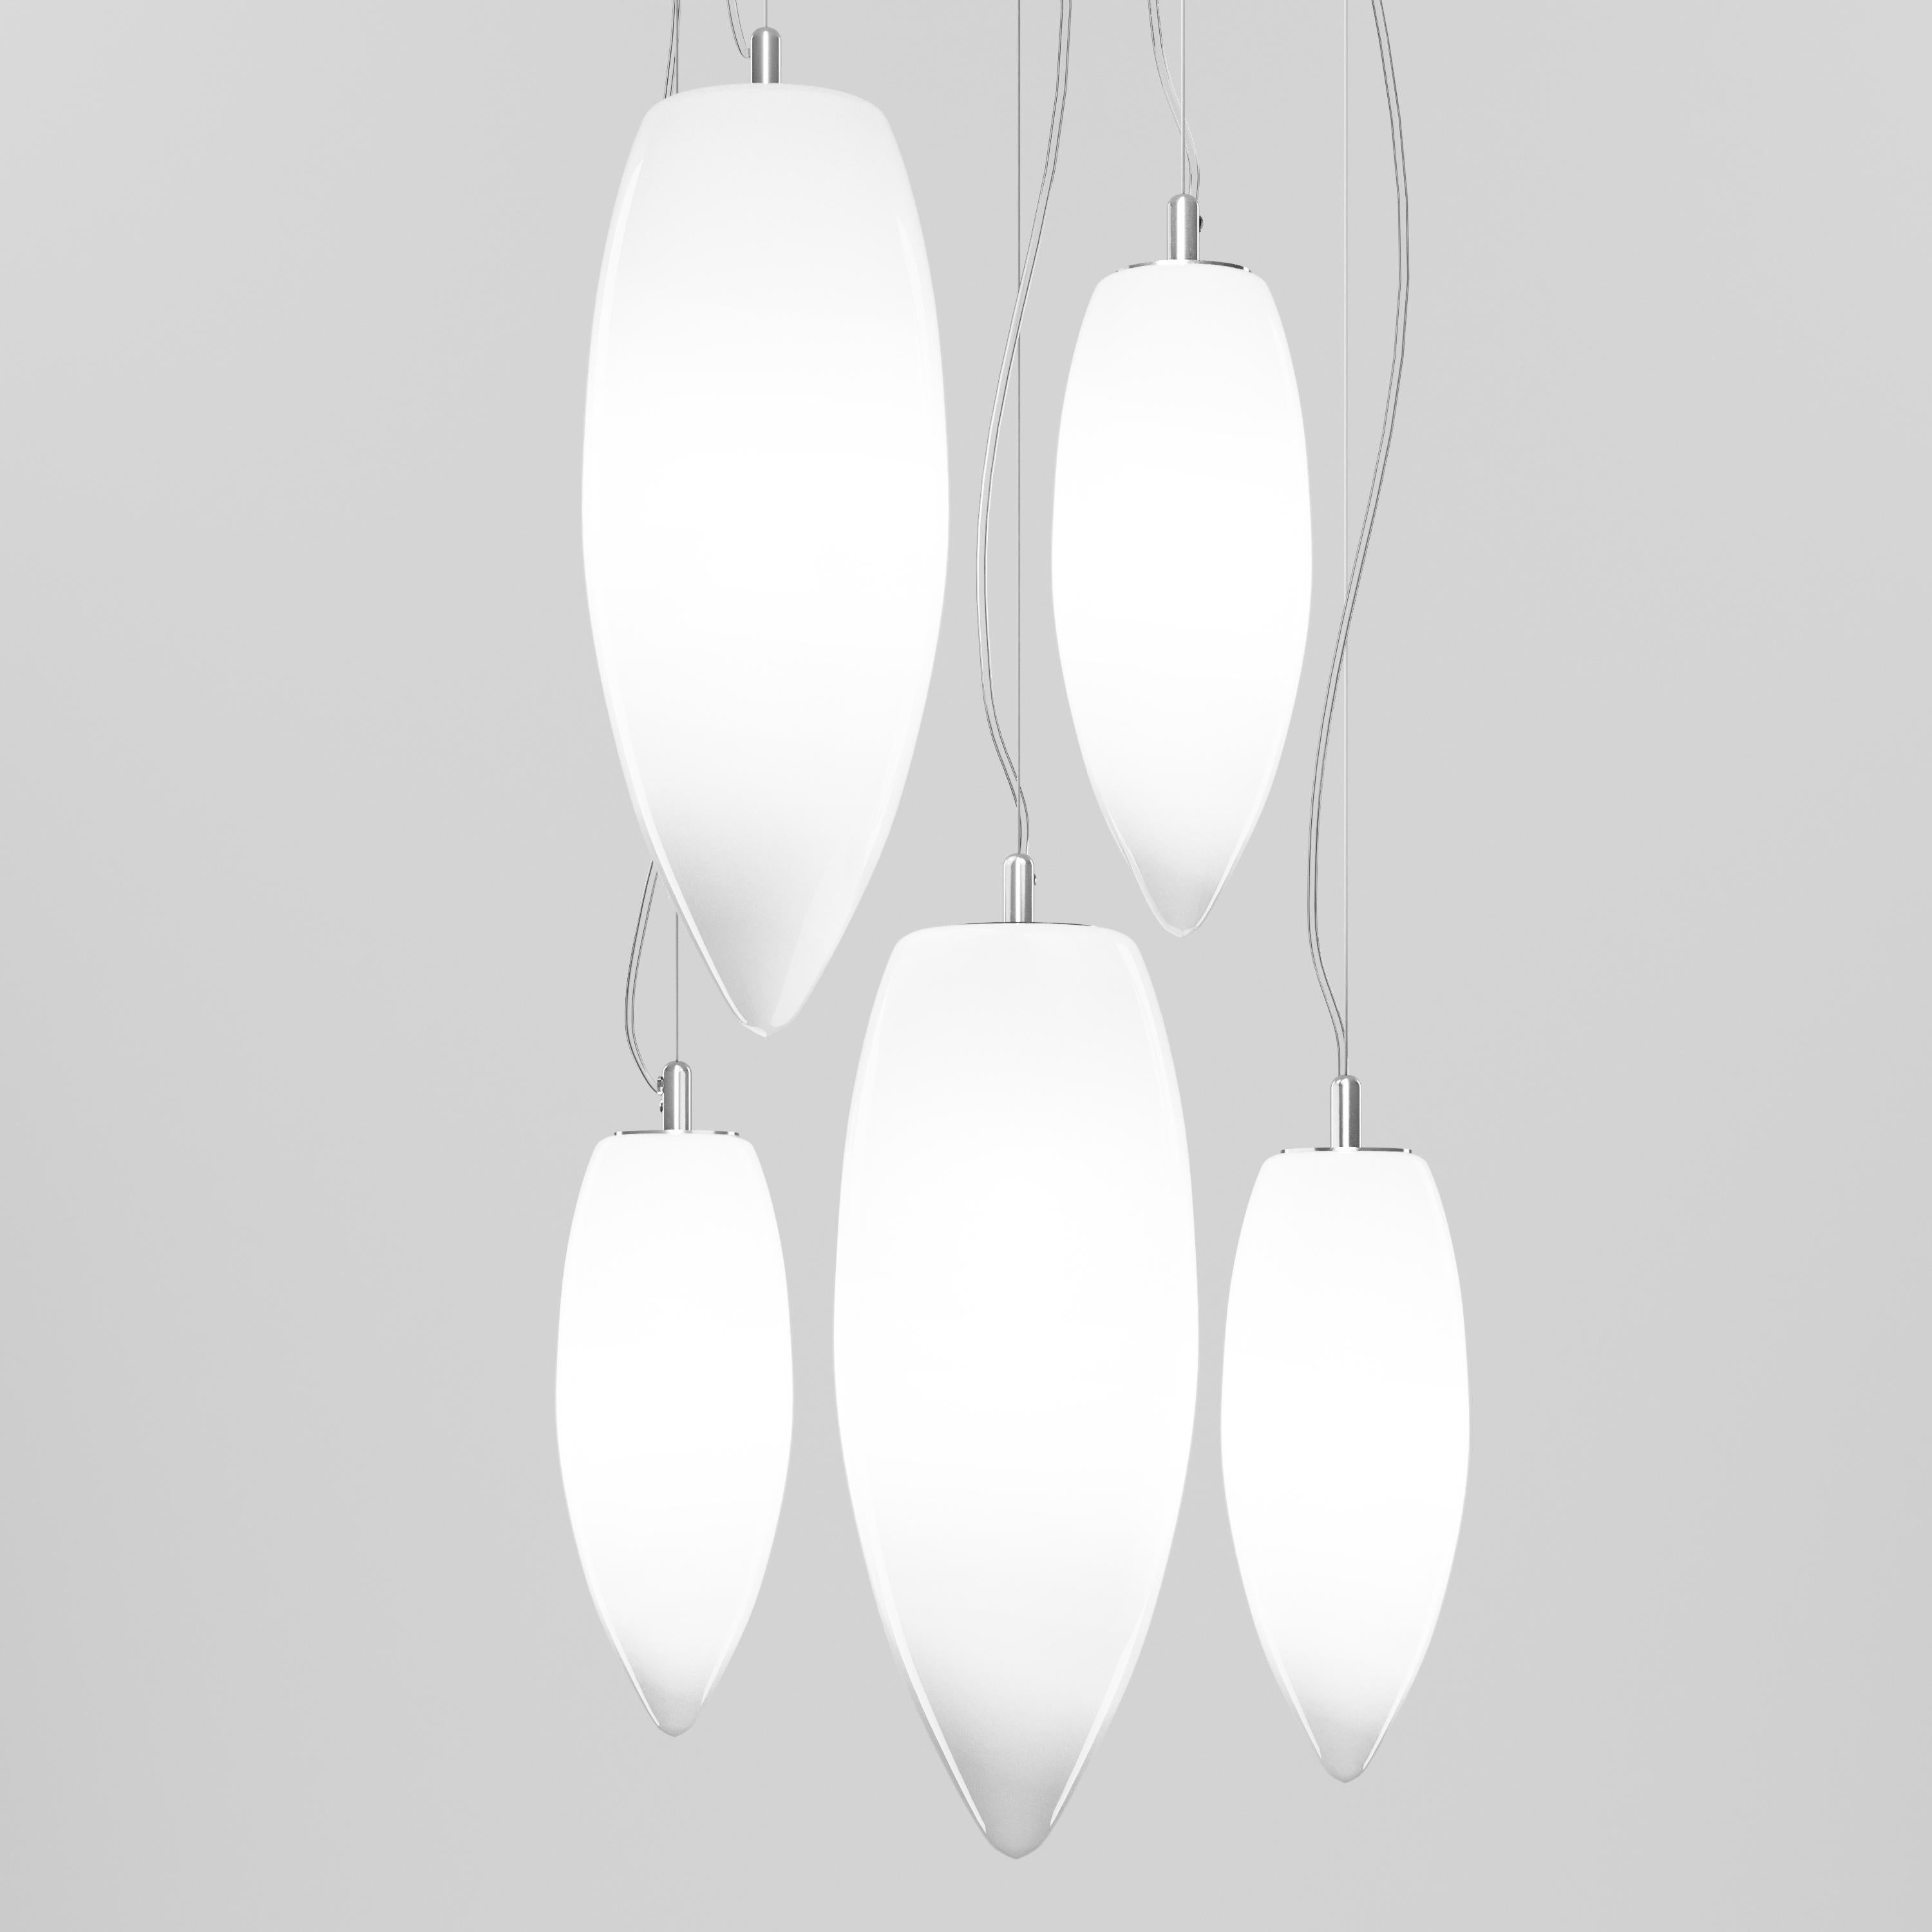 Unique teardrop-shaped pendant light, mouth-blown with a technique that transforms Murano glass from white to transparent. Available in two sizes.

Specifications:
Material: Glass, metal
Light source: E26 UL
No of bulbs: 1×60W E26 UL